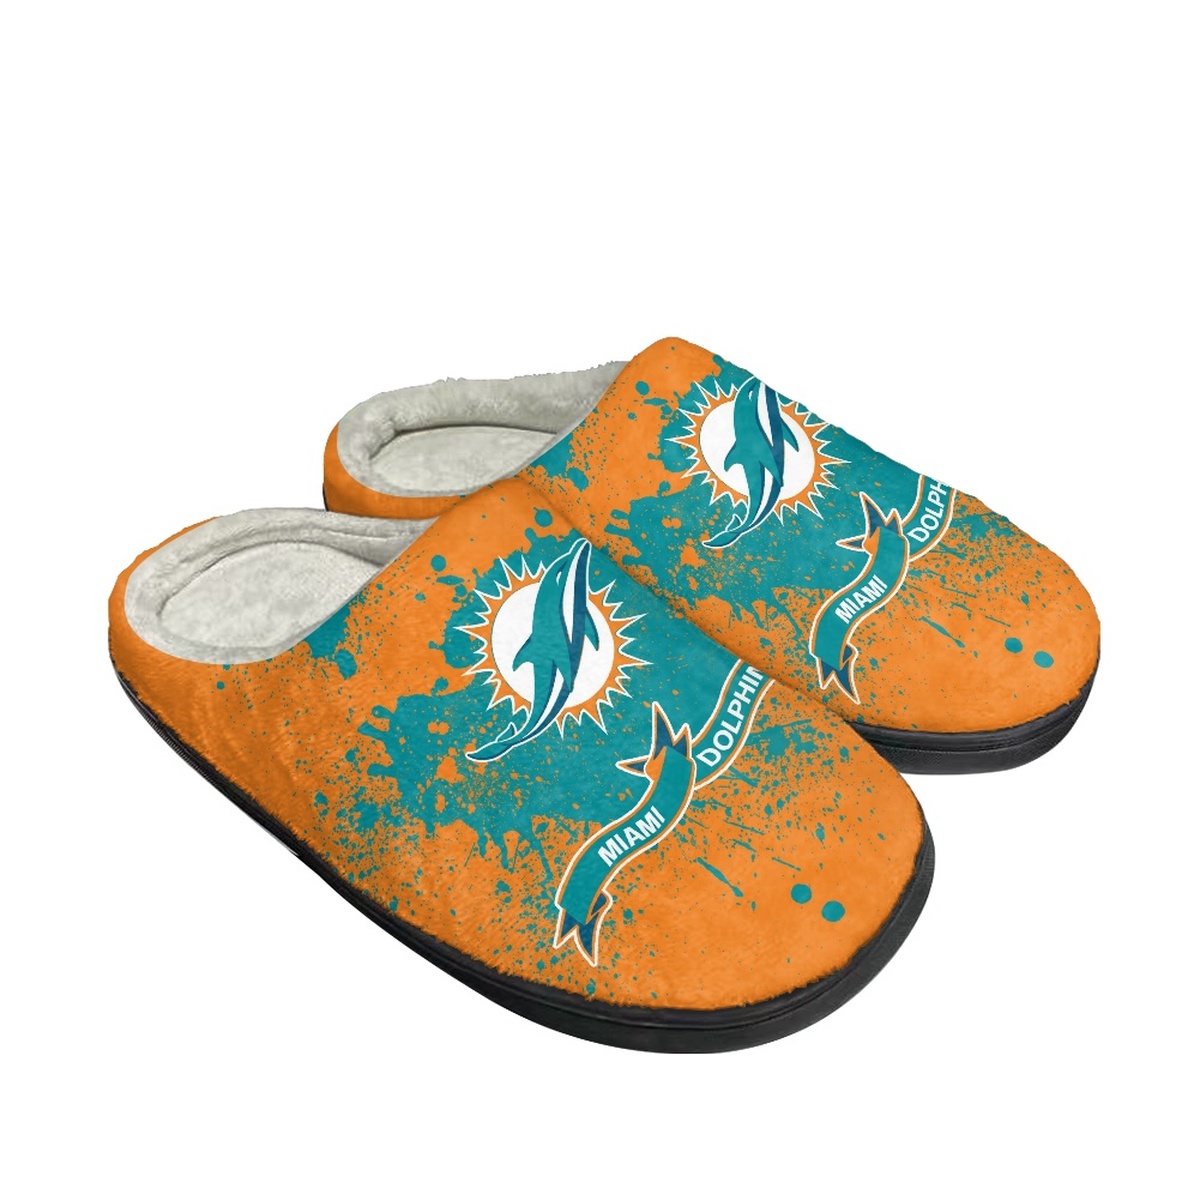 Men's Miami Dolphins Slippers/Shoes 005